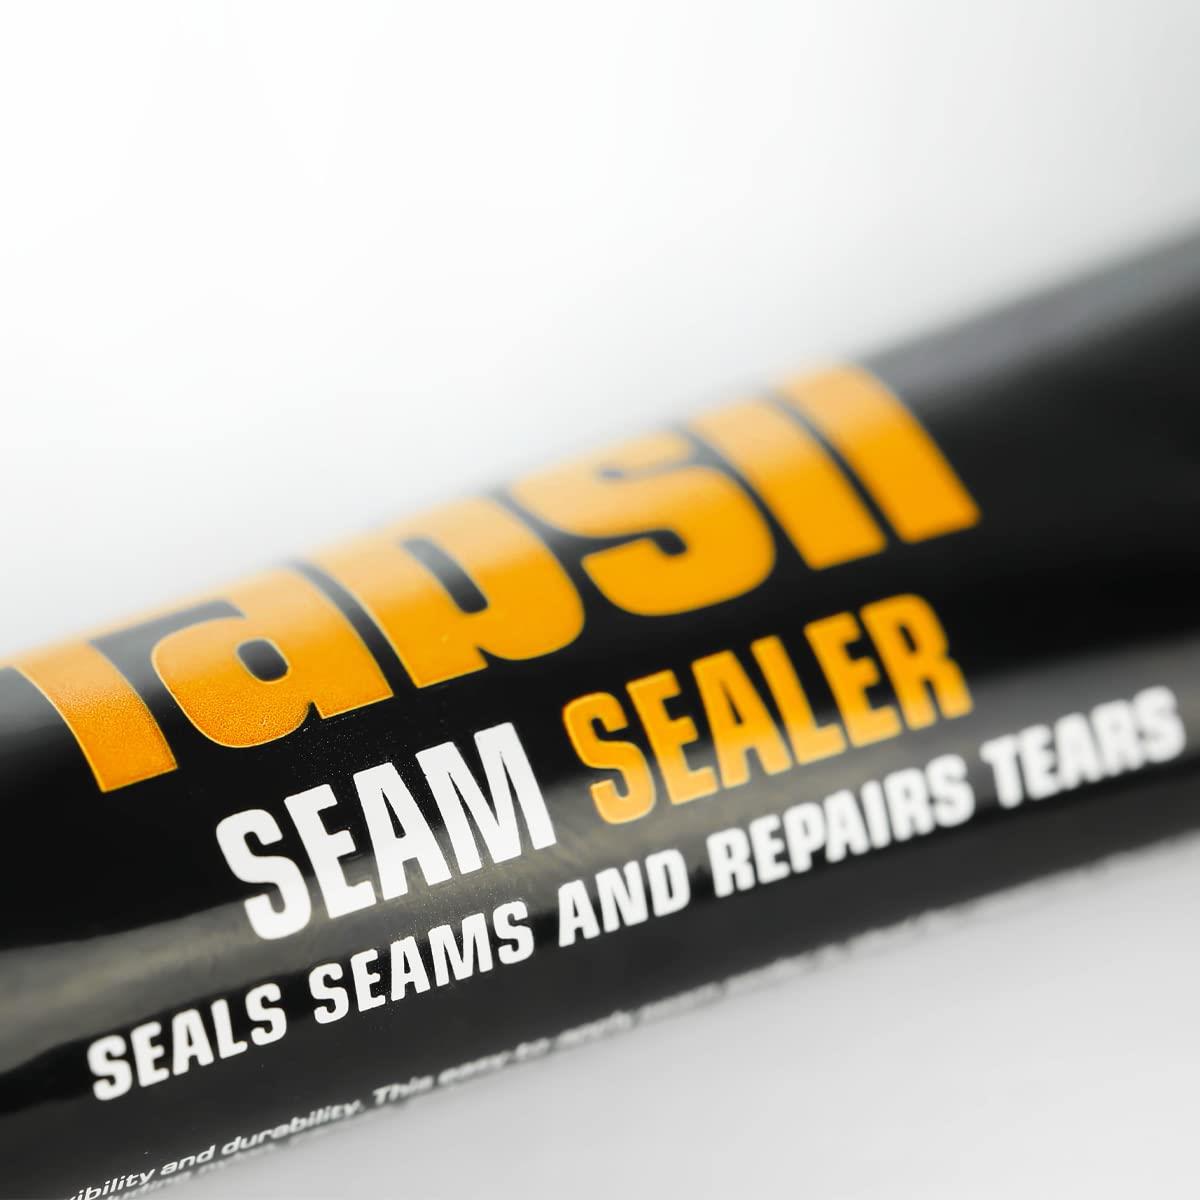 A close-up of the tube of Fabsil Seam Sealer. The text on the tube reads "Seals seams and repairs tears."